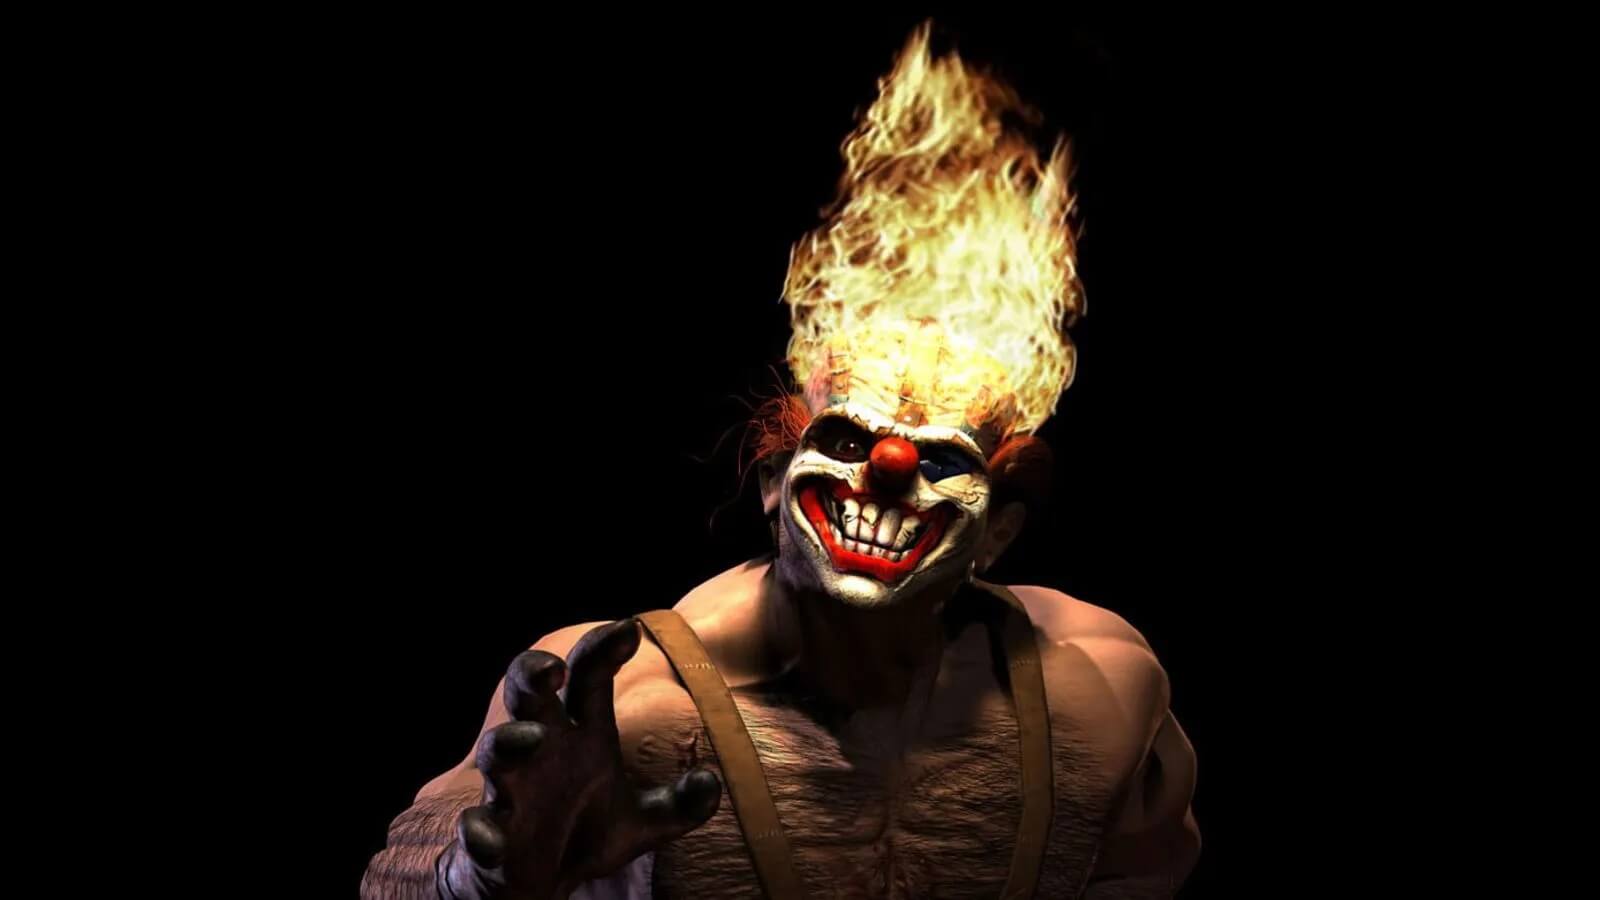 Twisted Metal series adaptation to be helmed by director and exec producer Kitao Sakurai